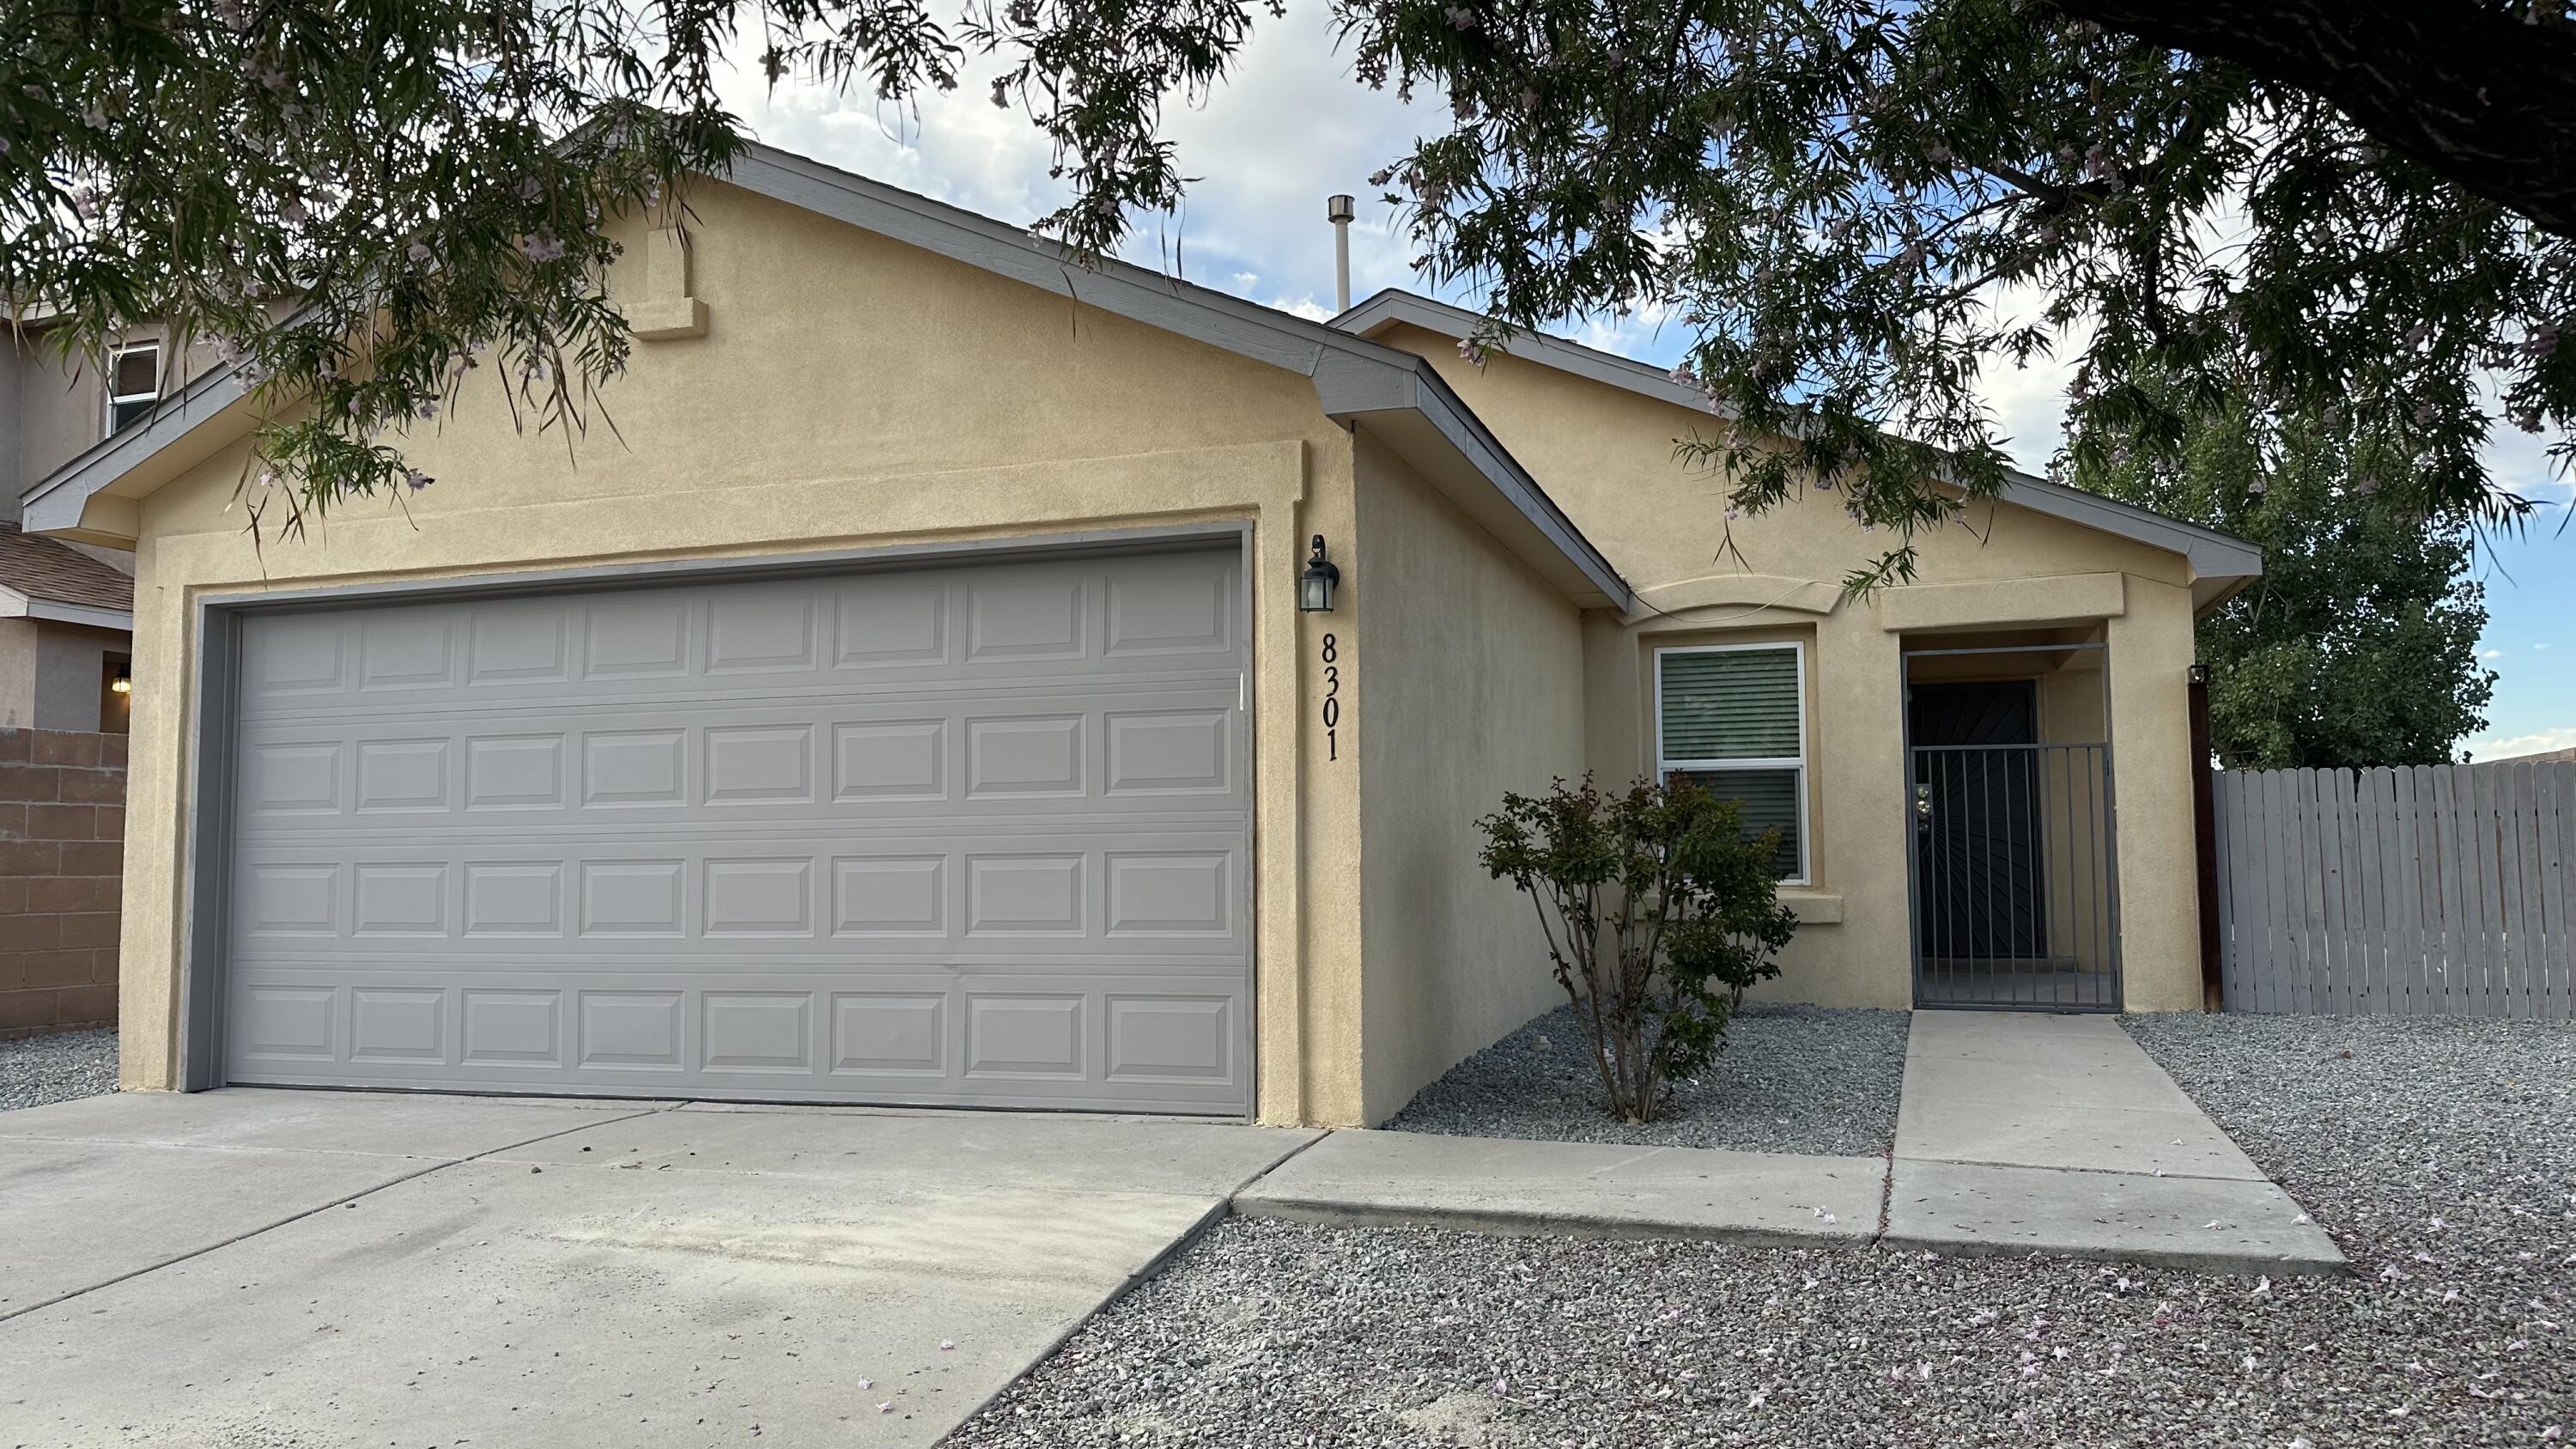 Look No Further, This Recent Remodeled Home siting on Corner Lot,In Need of New Owner, New Roof, Freshly Painted Inside And Out. New Cabinets, New Stainless Steal Appliances, New Granite Counters